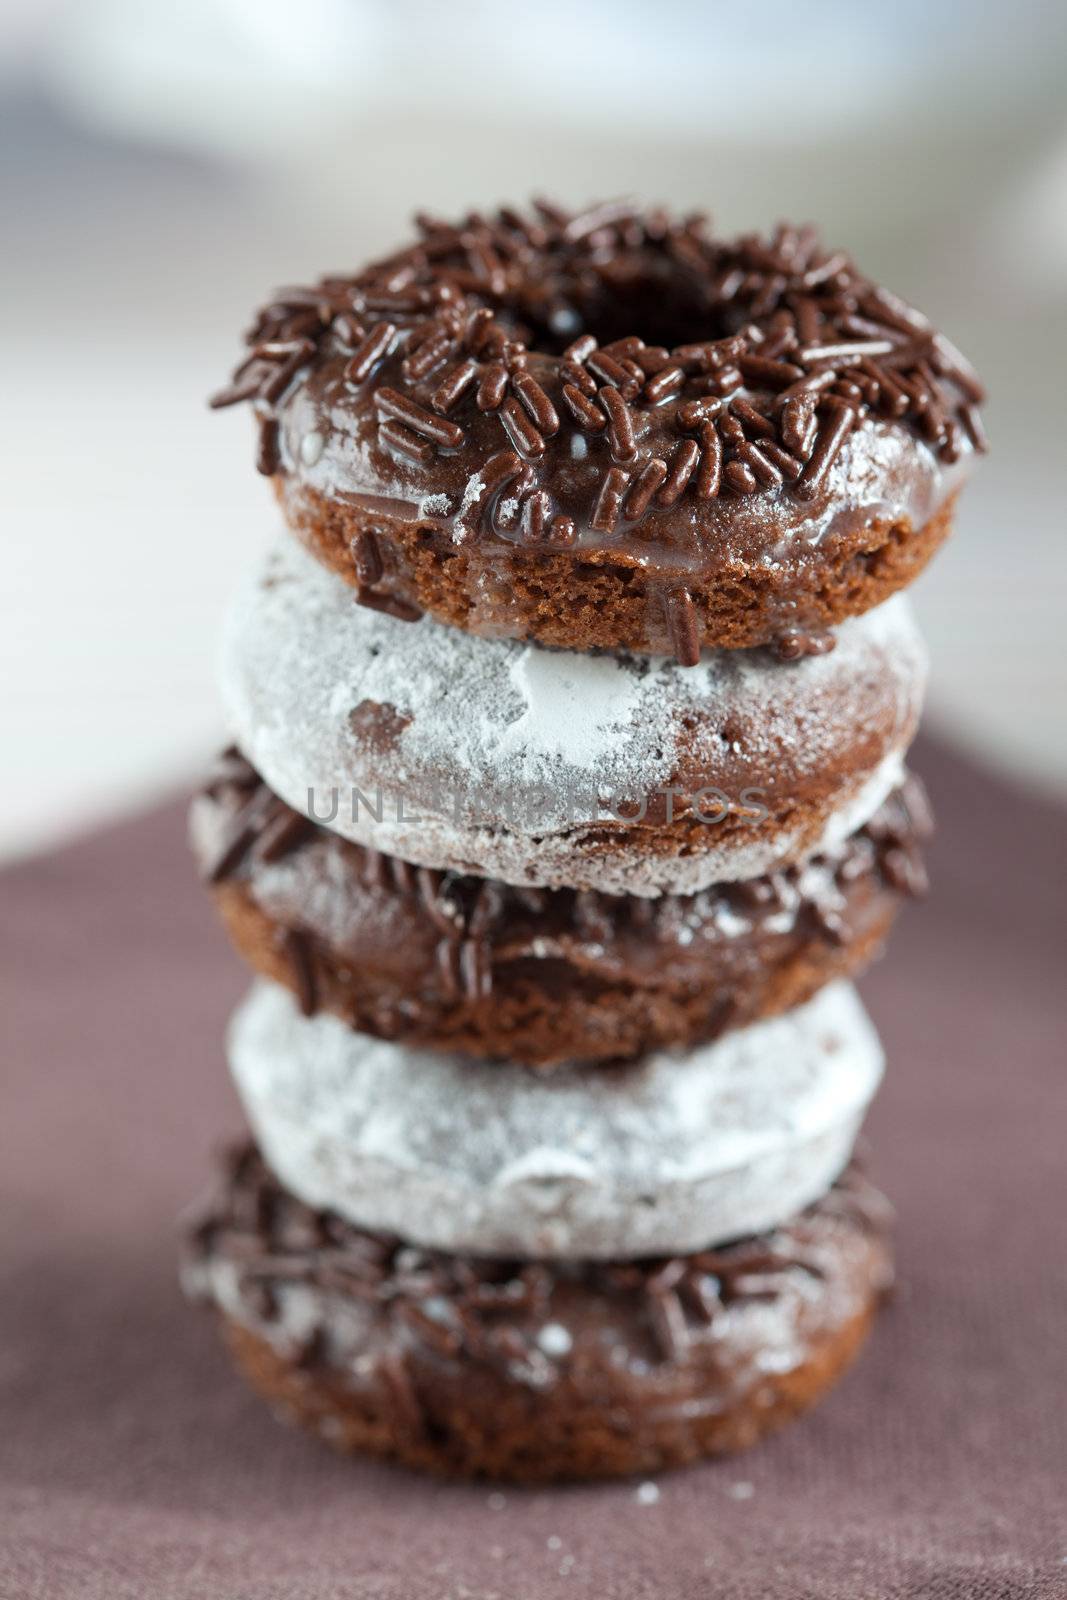 Stack of doughnuts by Fotosmurf